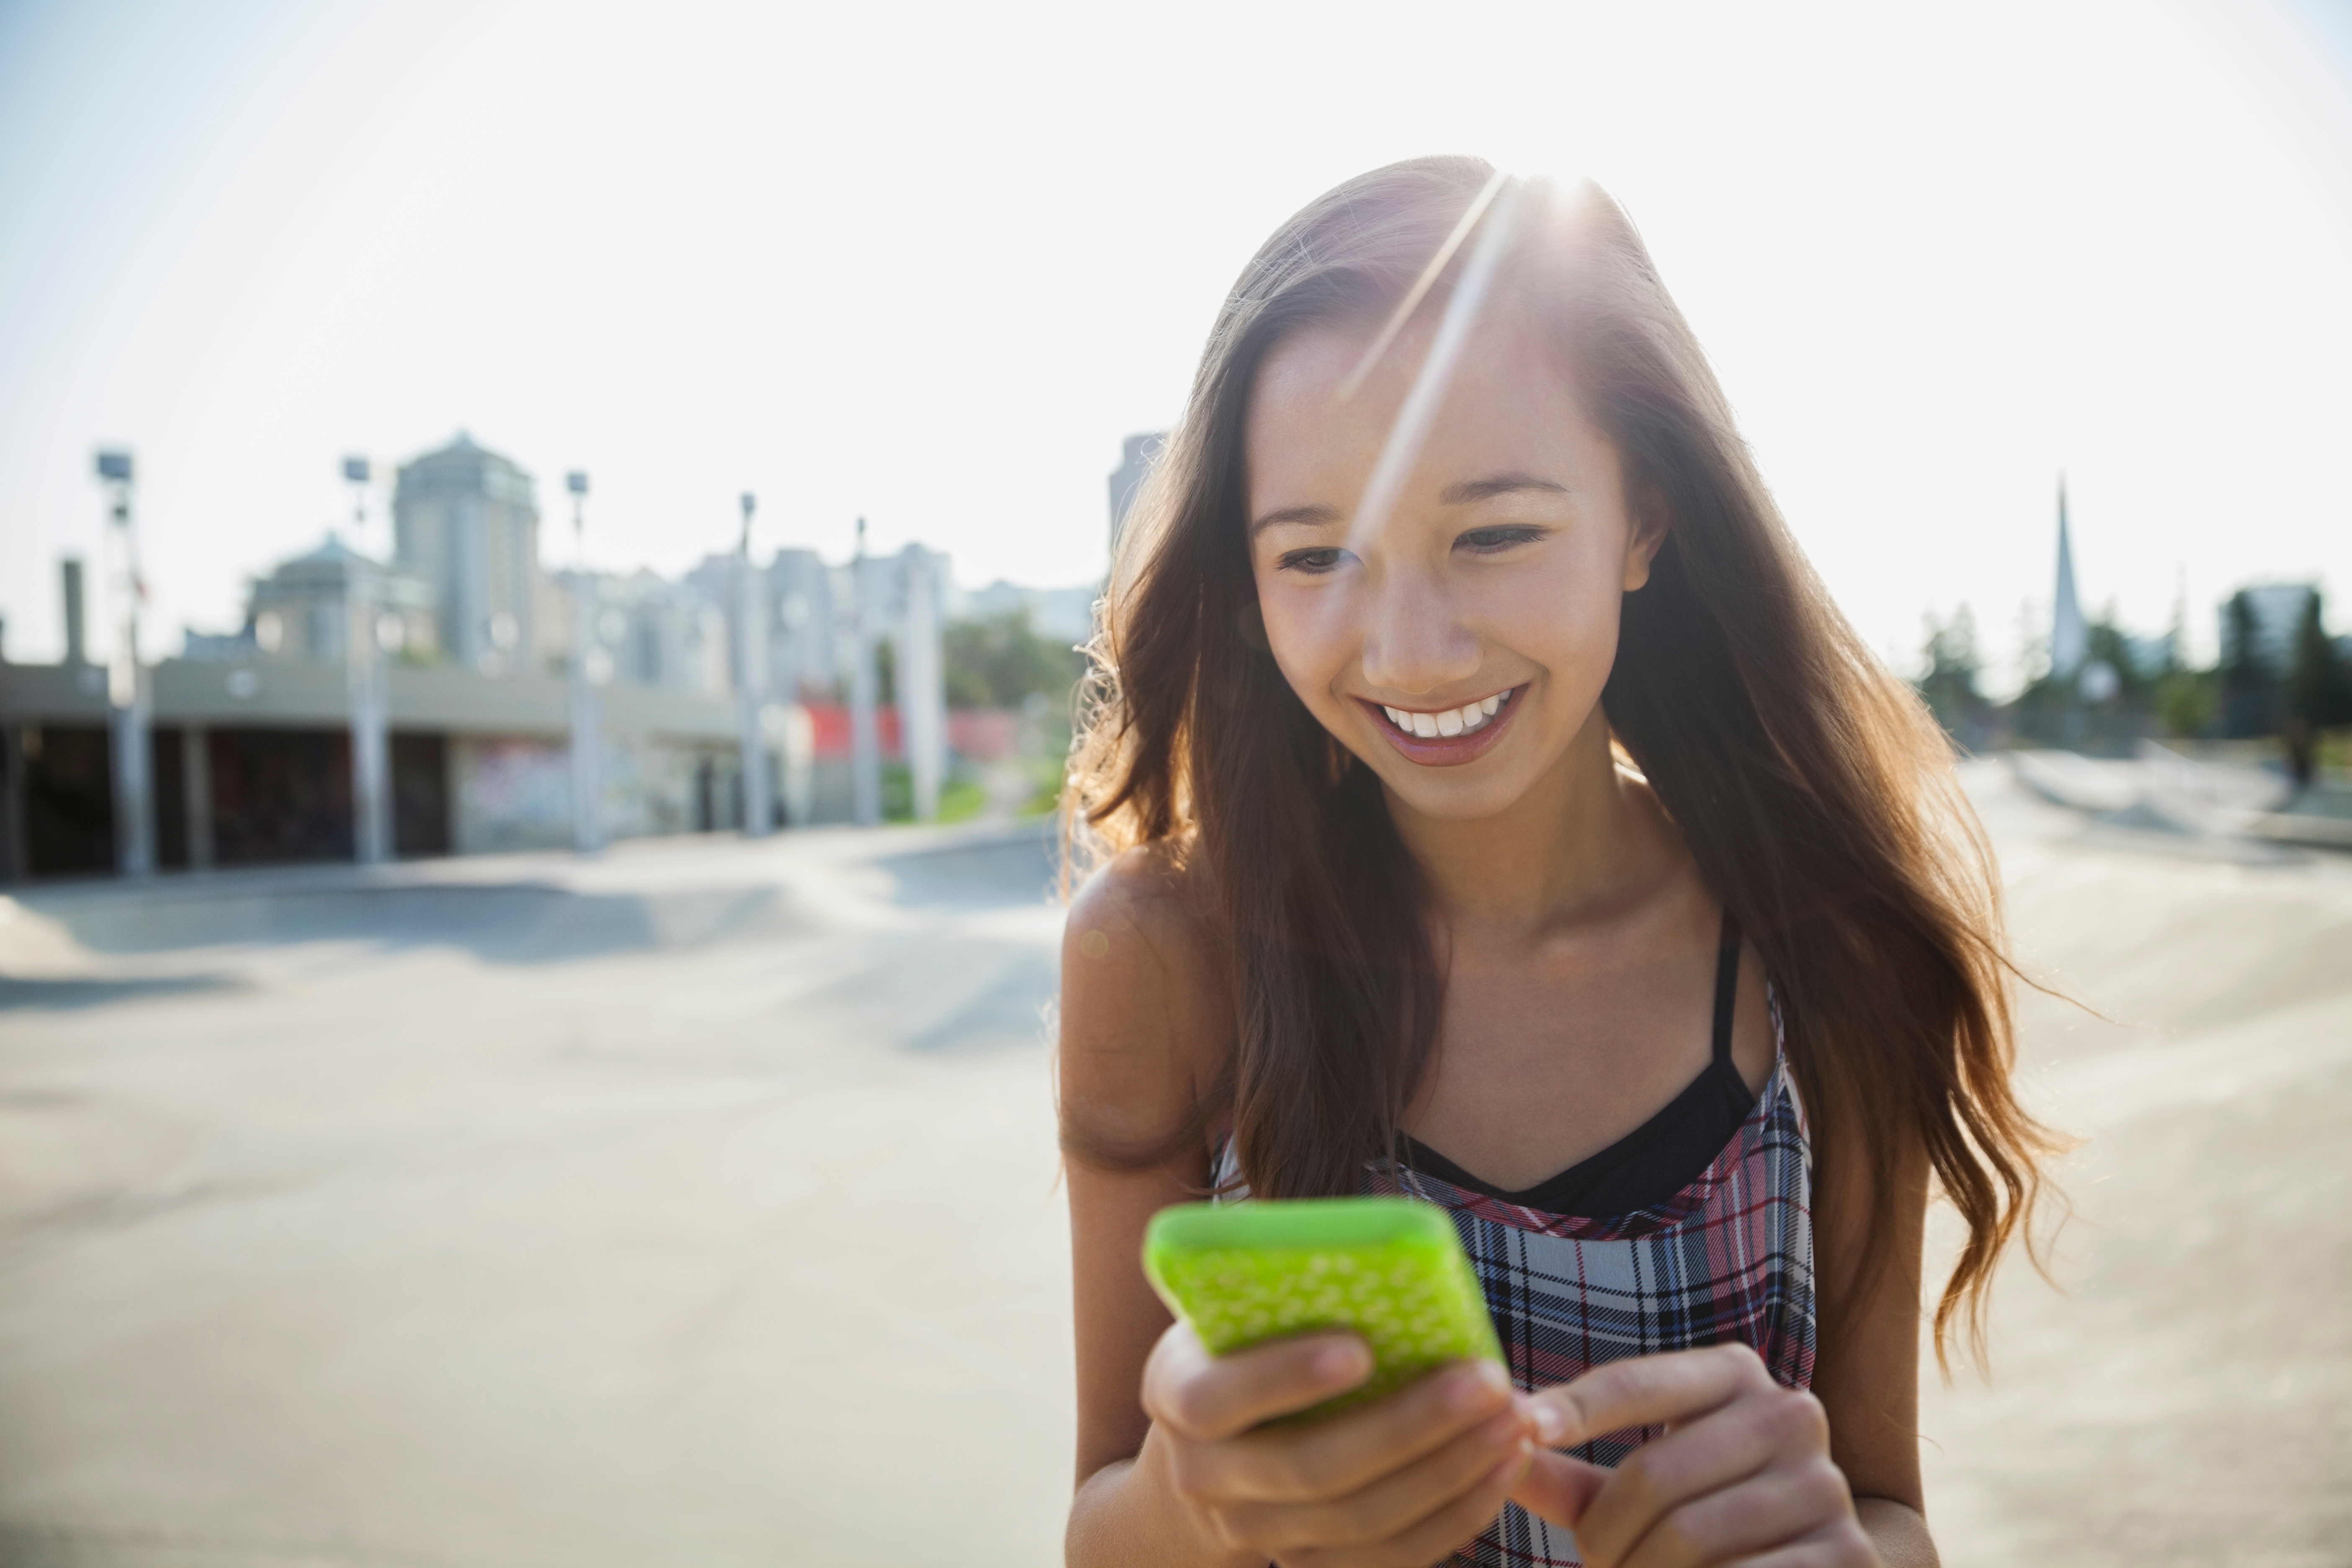 A smiling young girl on her green mobile phone.